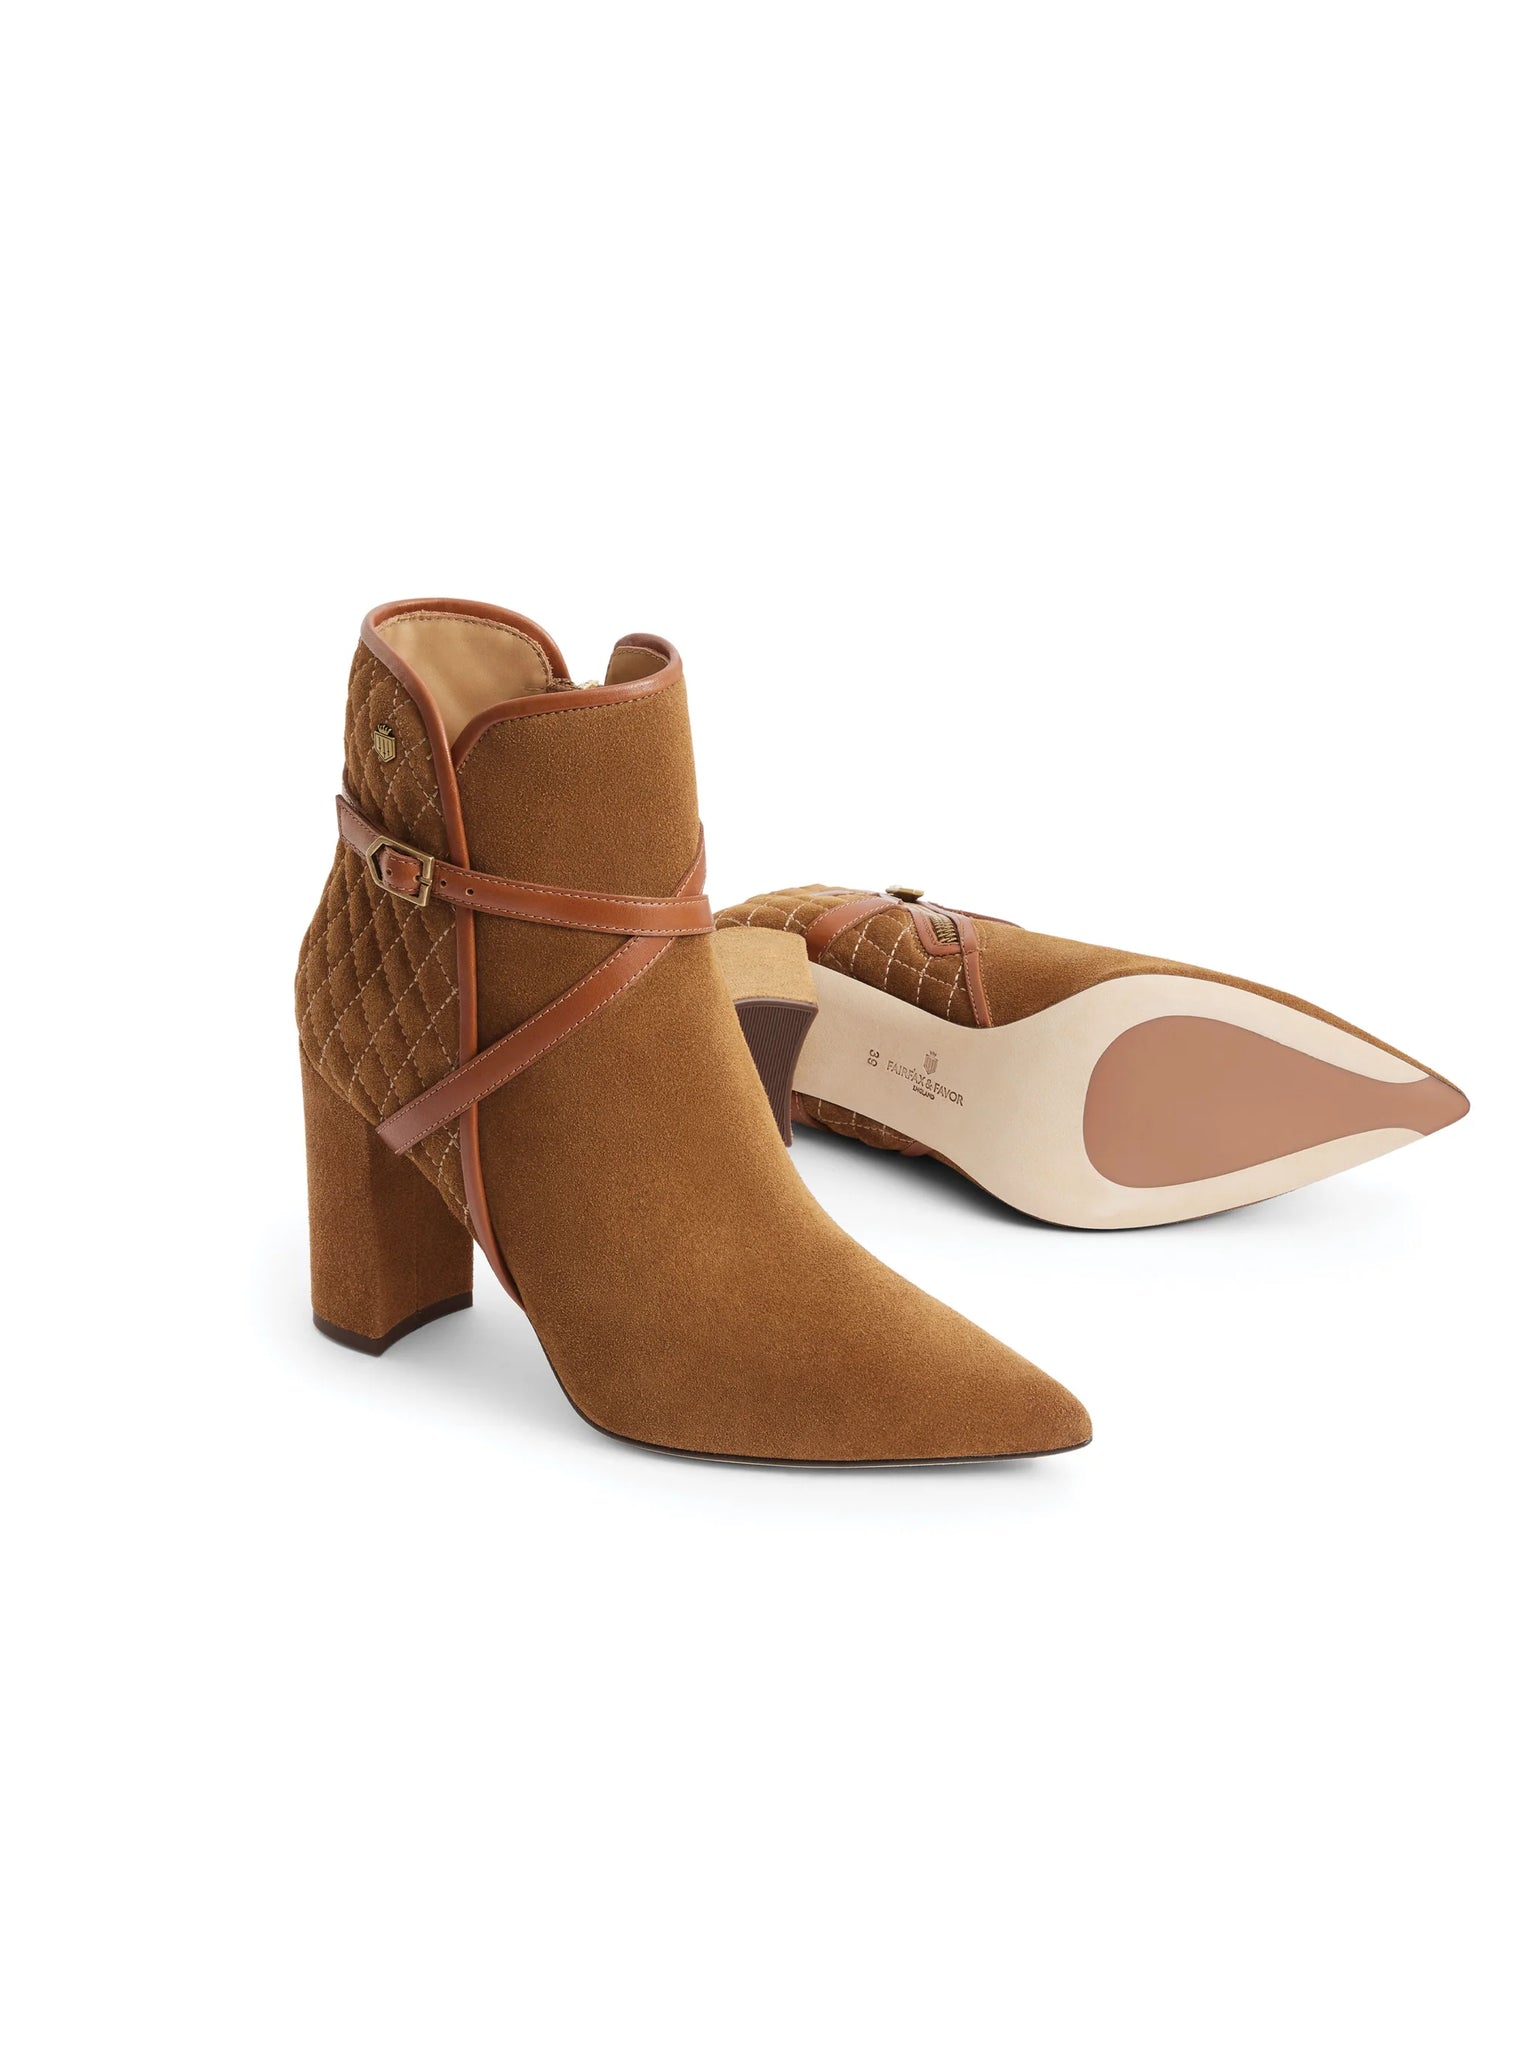 THE FAIRFAX & FAVOR CHISWICK HEELED BOOT